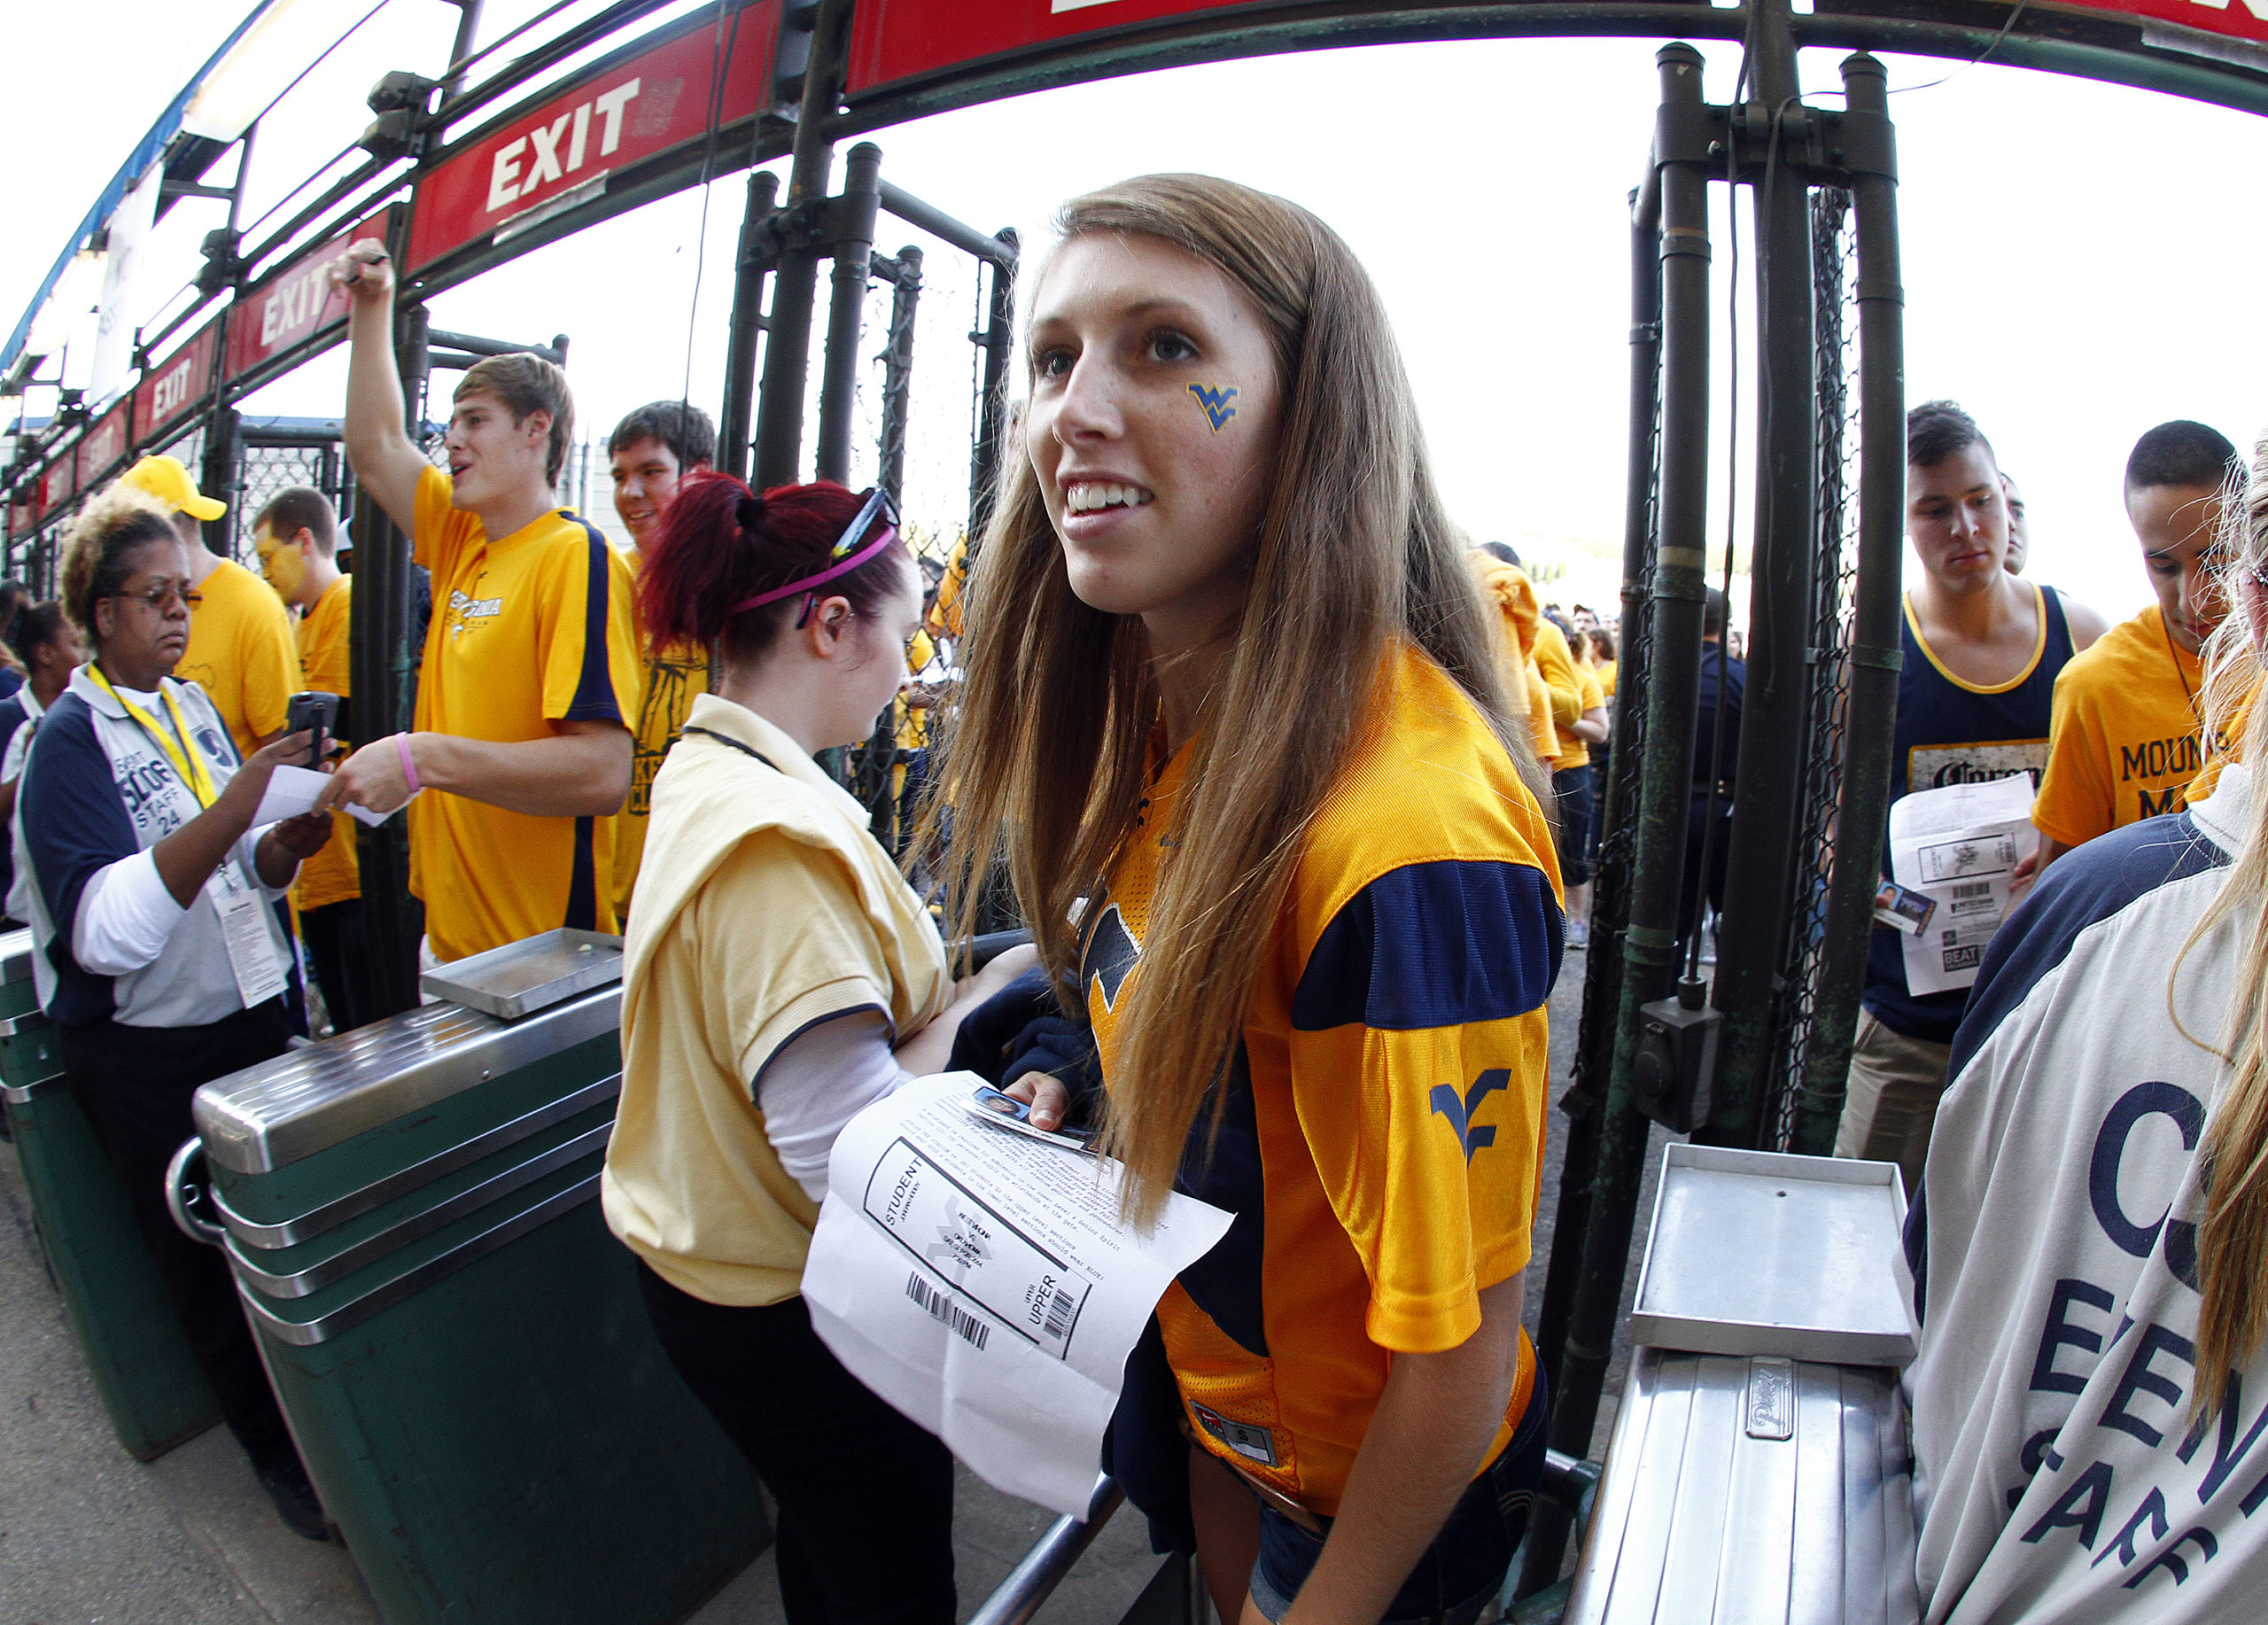 A WVU student enters the stadium before the game between the Oklahoma Sooners and the West Virginia Mountaineers on September 20, 2014 at Mountaineer Field in Morgantown, West Virginia. (Photo by Justin K. Aller/Getty Images)